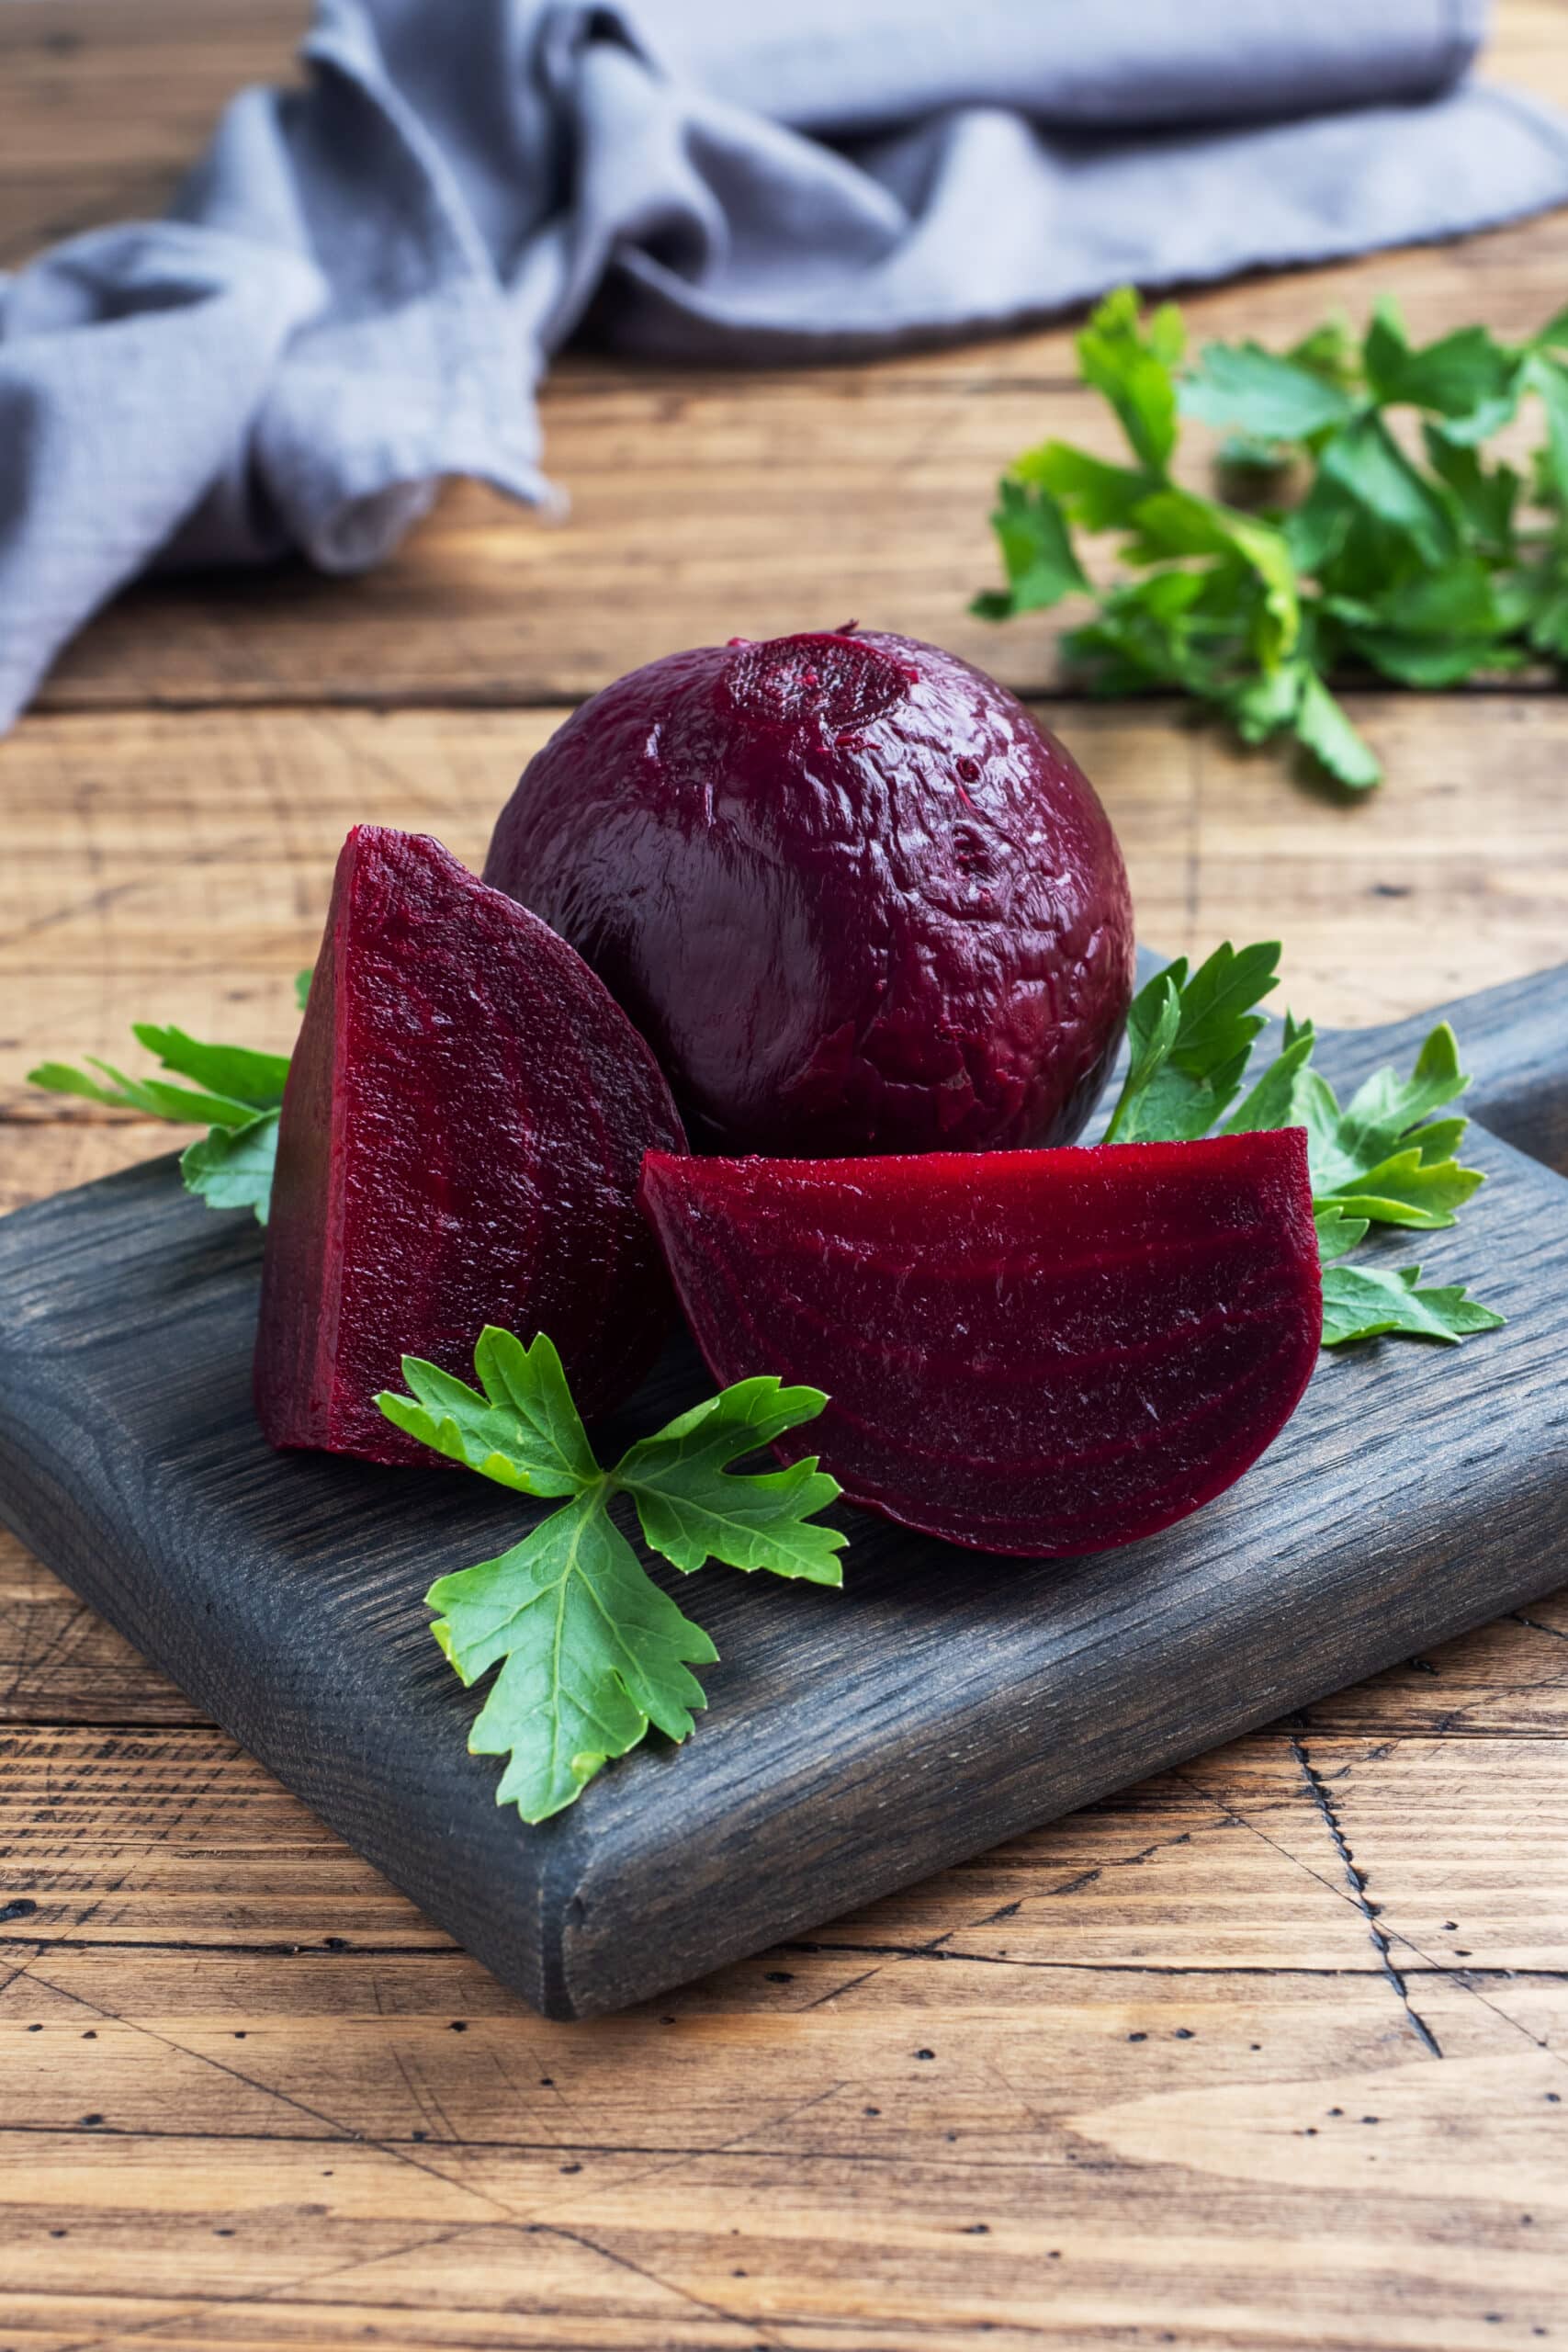 How To Cook Raw Beets